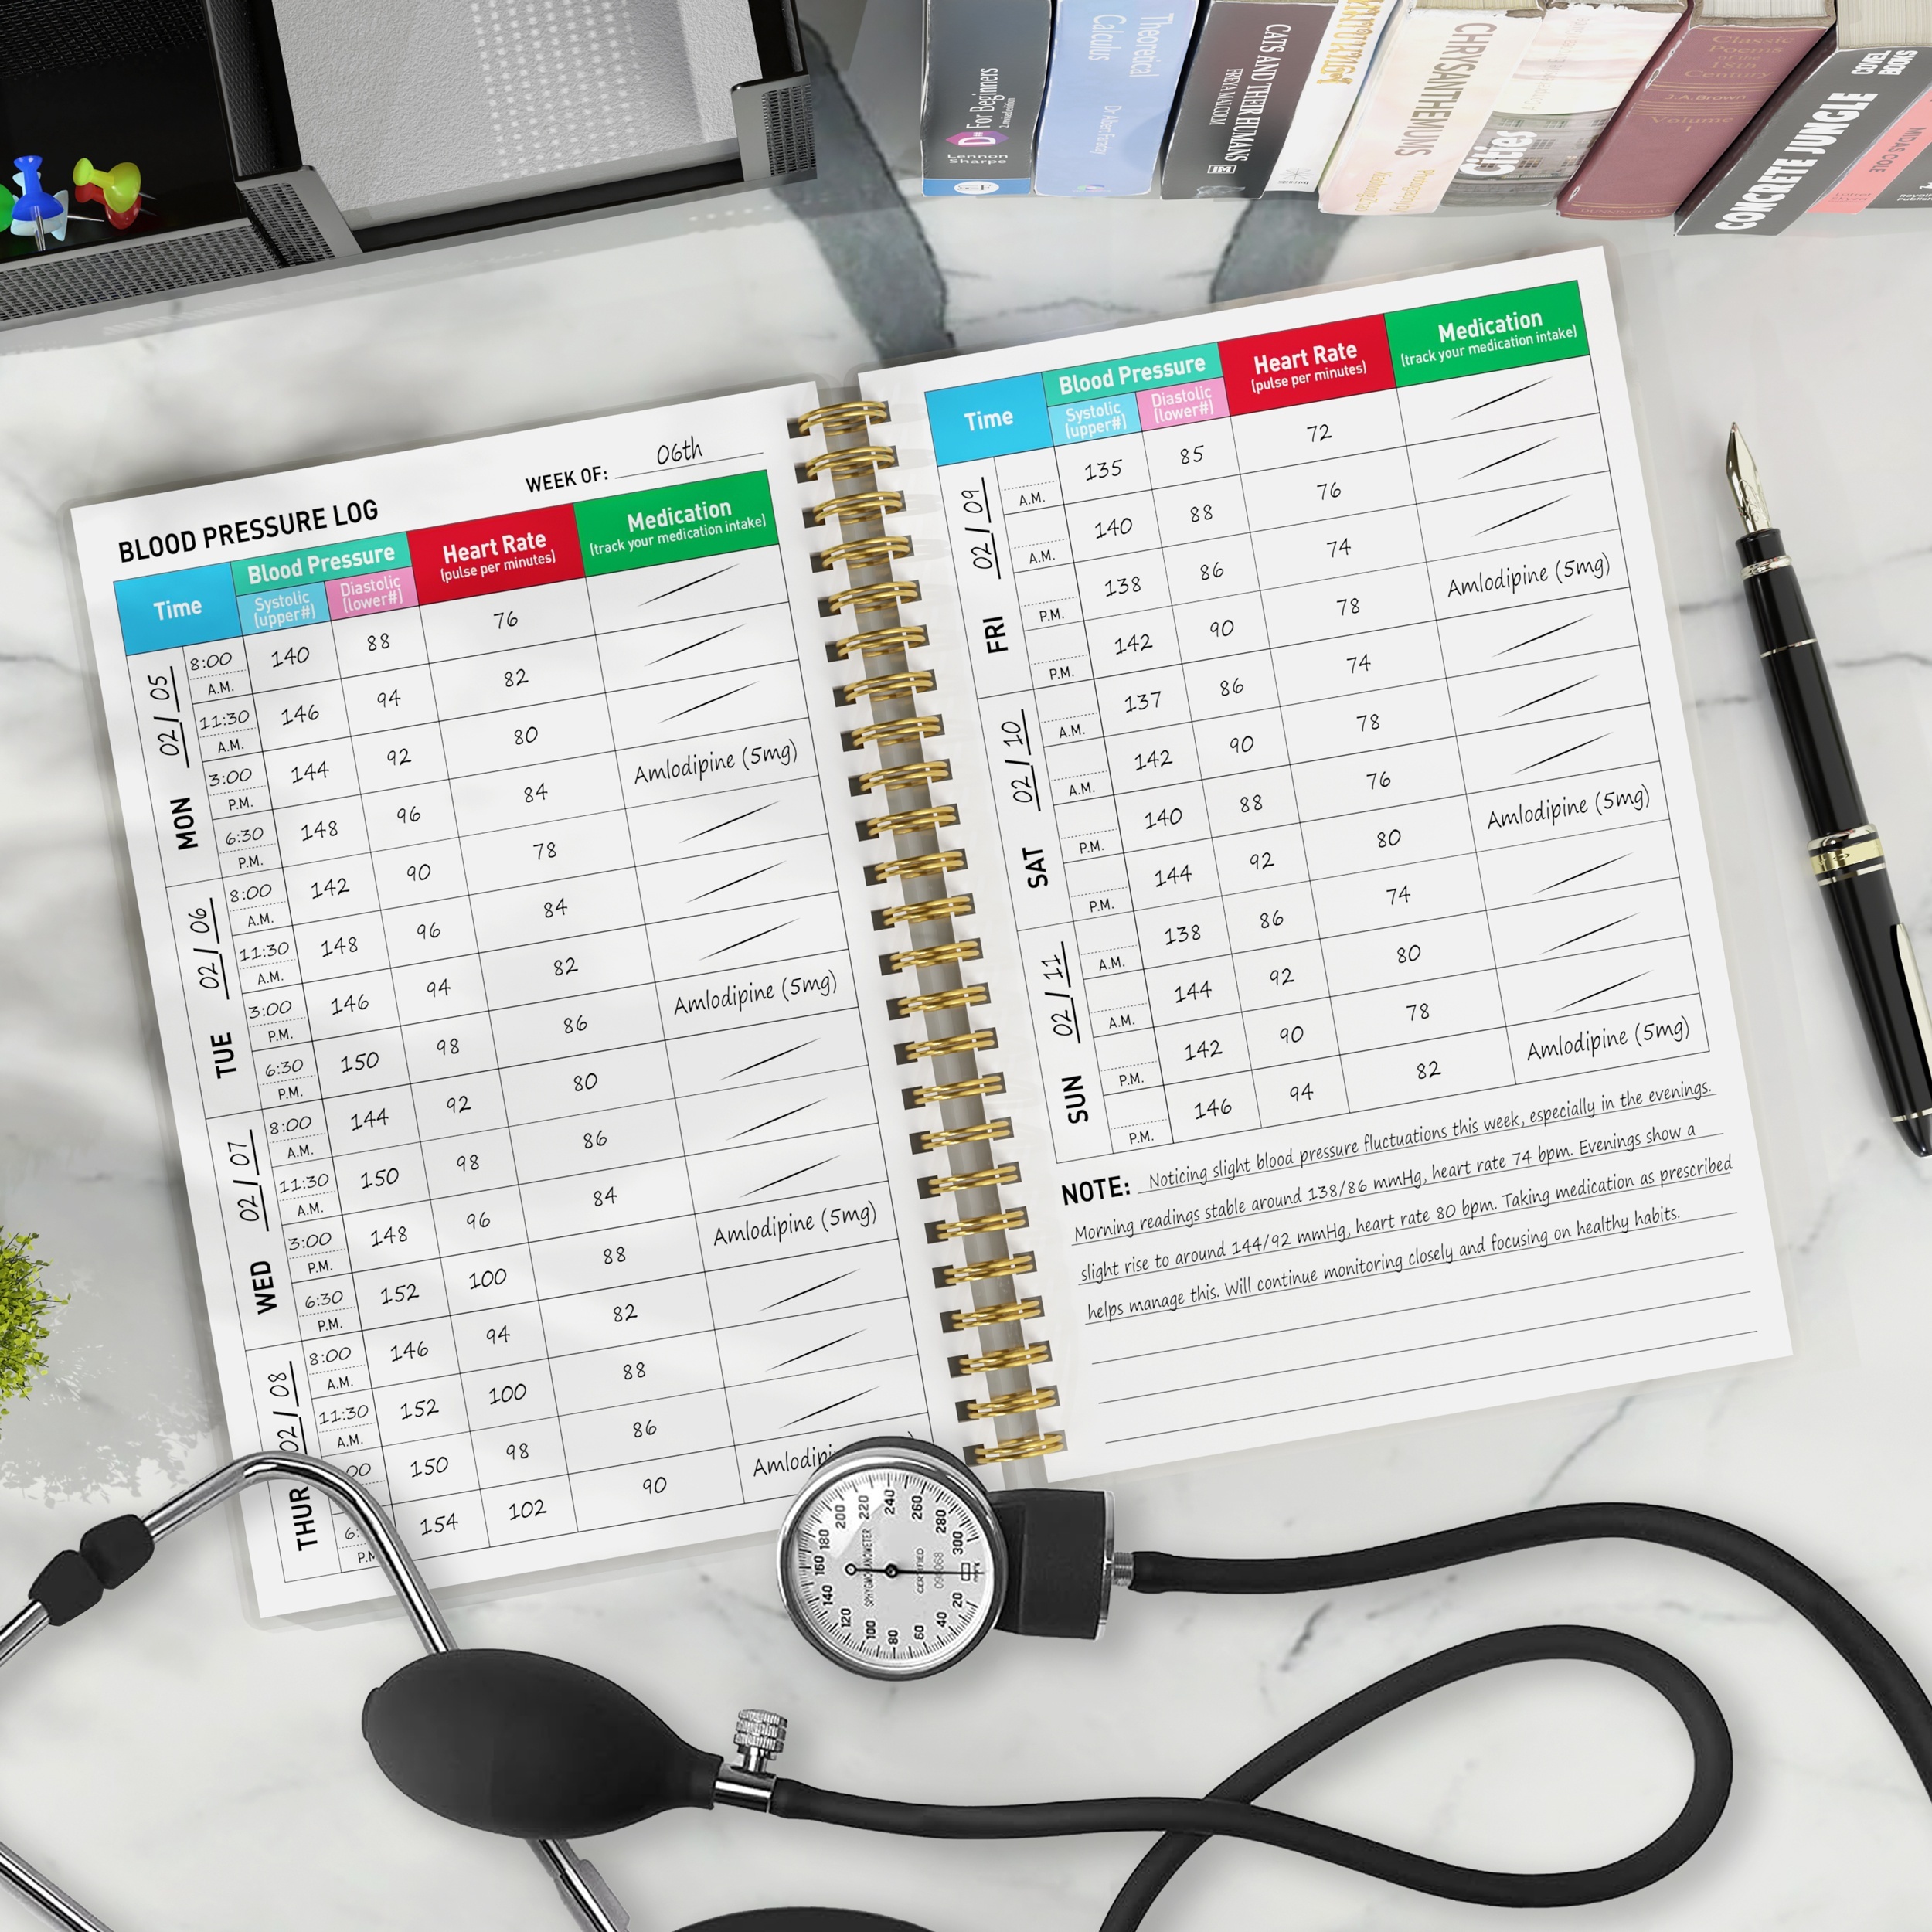 

Blood Pressure Logbook With Flexible Spiral Bound - Daily Recording And Tracking Blood Pressure, Heart Rate And Medication At Home, A5(8.6x5.9 In), 100gsm Paper